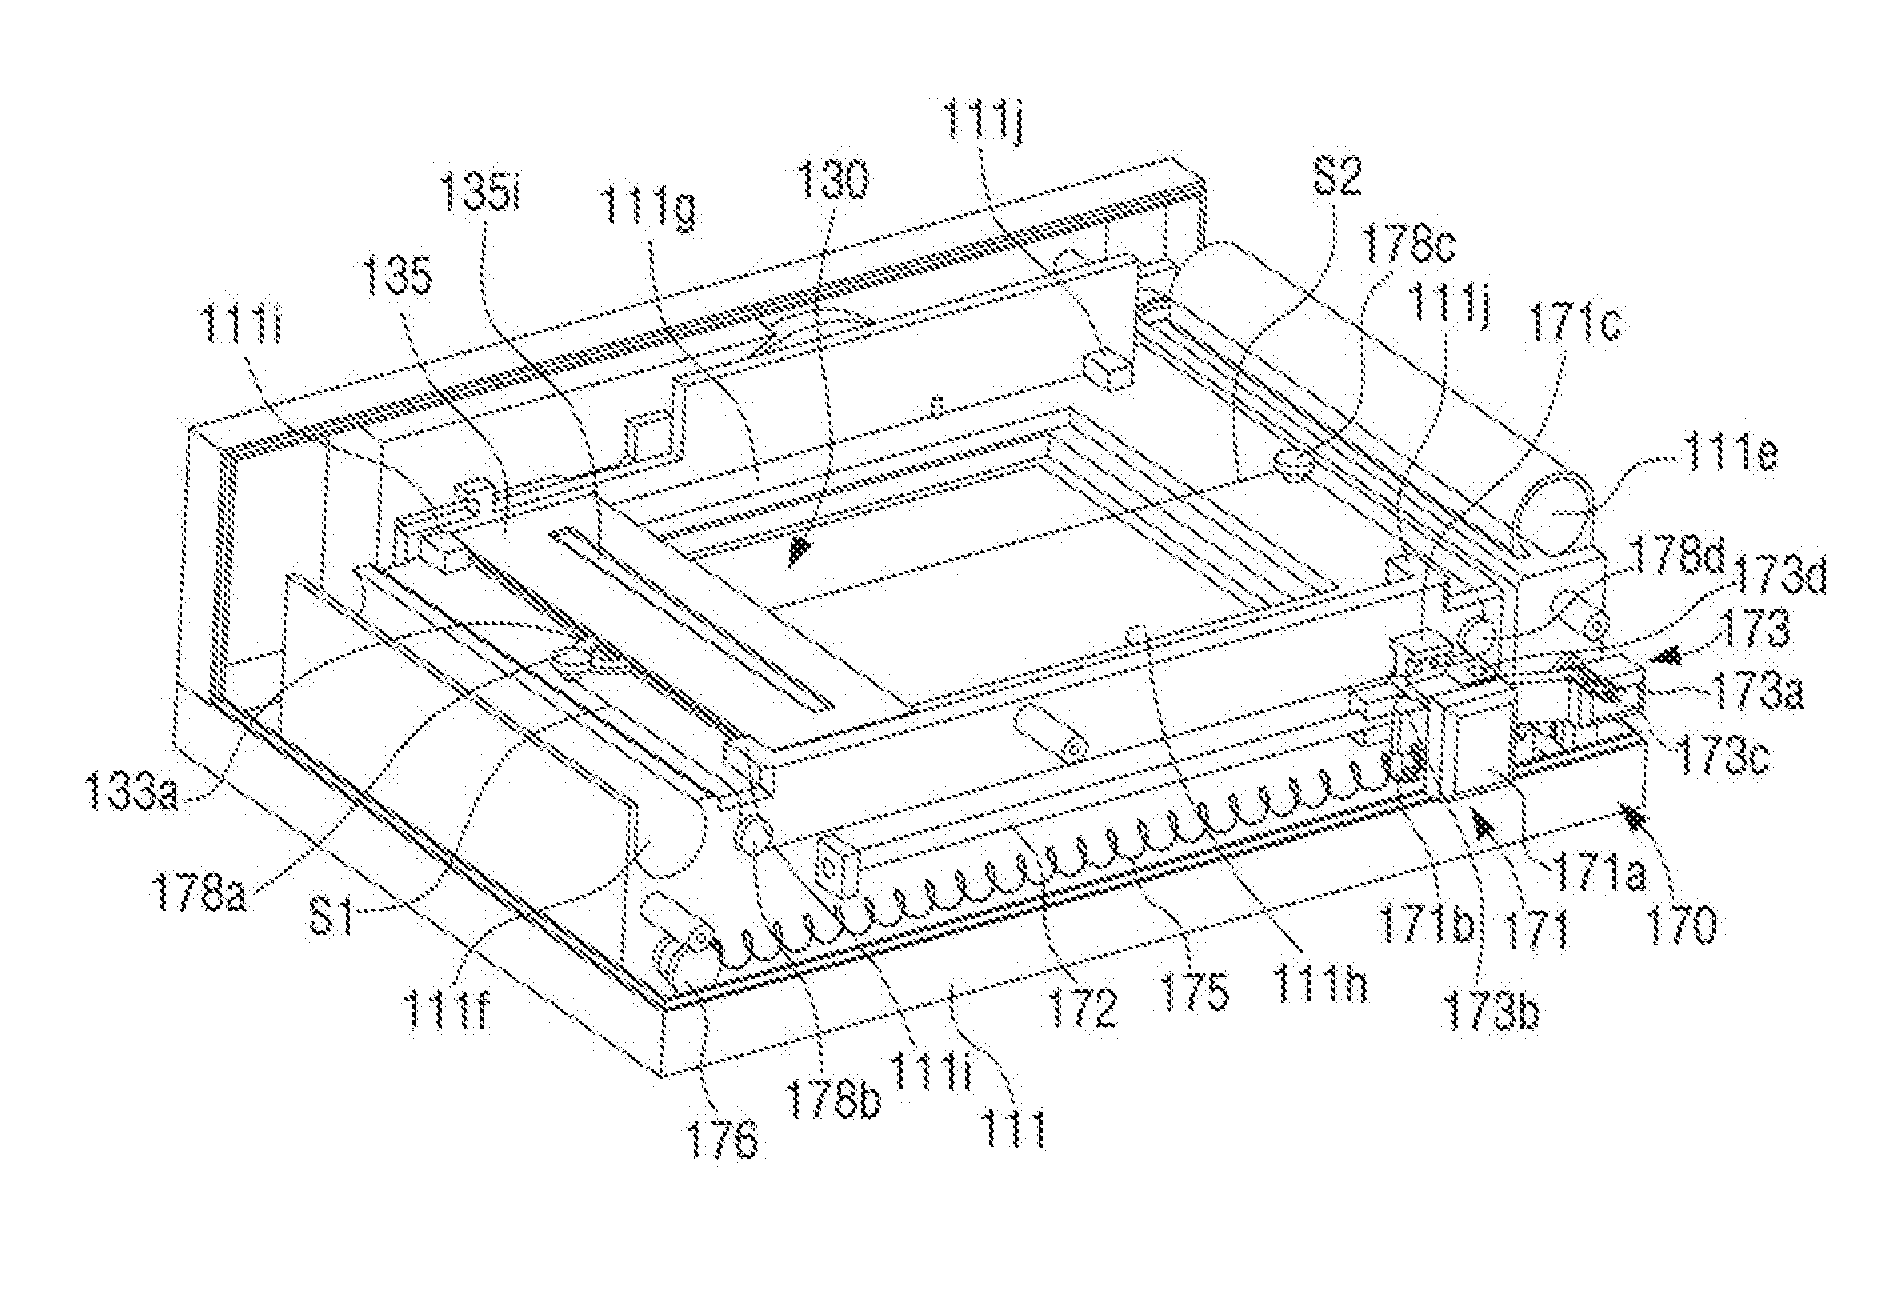 Portable image-forming device